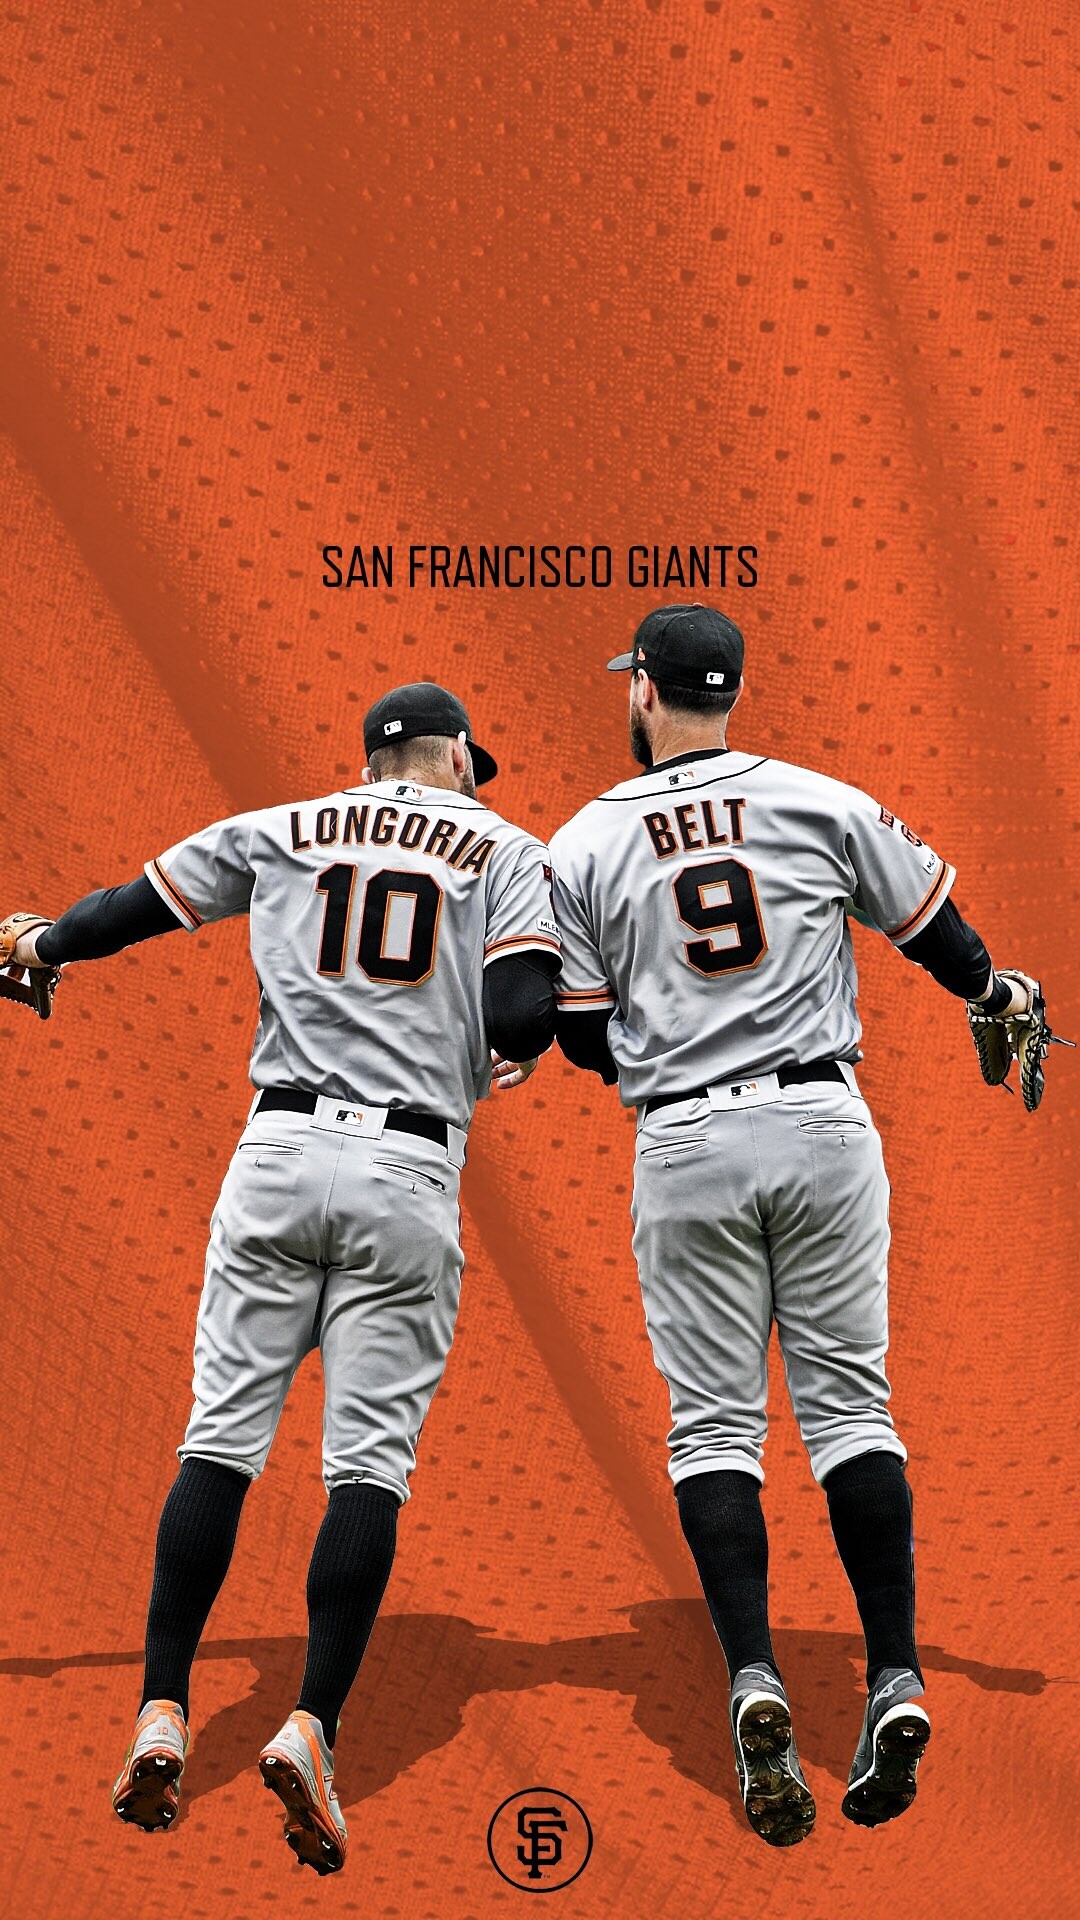 San Francisco Giants: Five-time World Series championships winners, The Baseball Hall of Fame members. 1080x1920 Full HD Background.